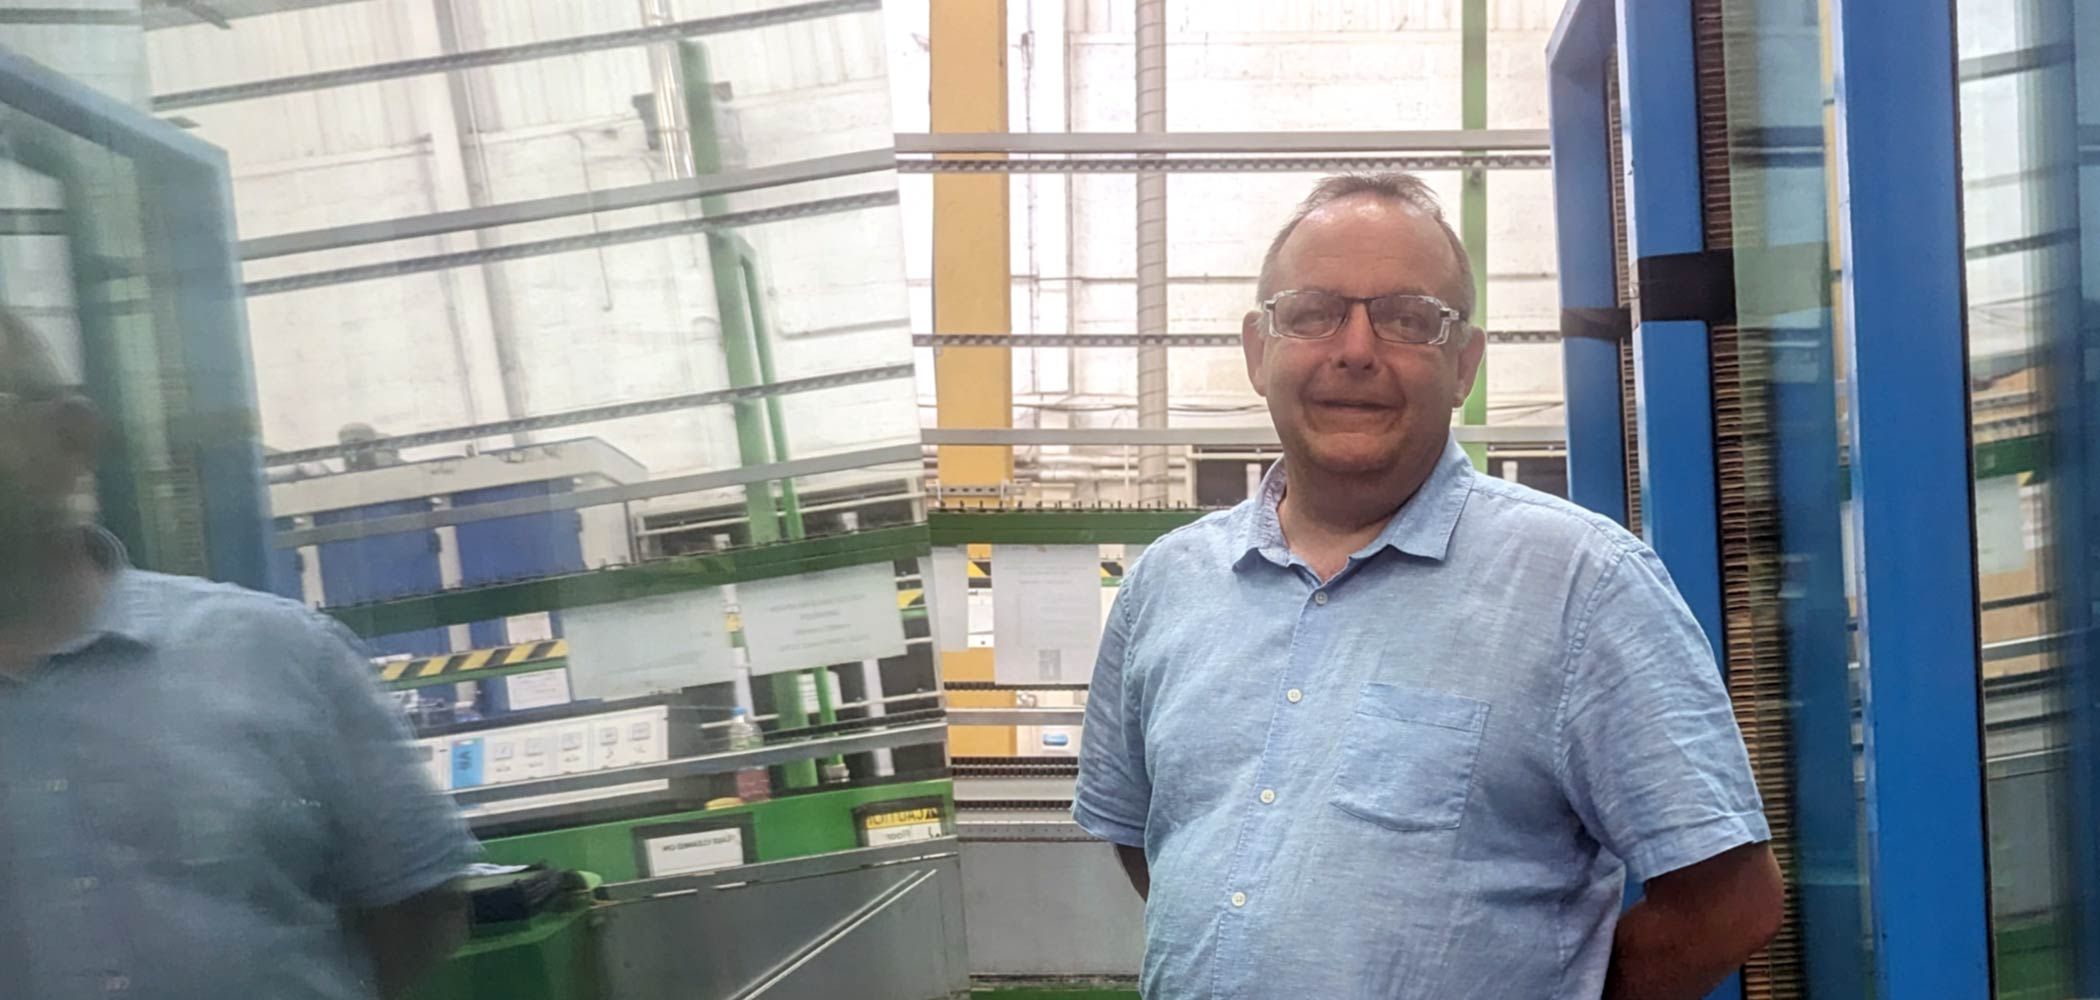 Steve Bunney of Cornwall Glass standing next to glass panes in the workshop